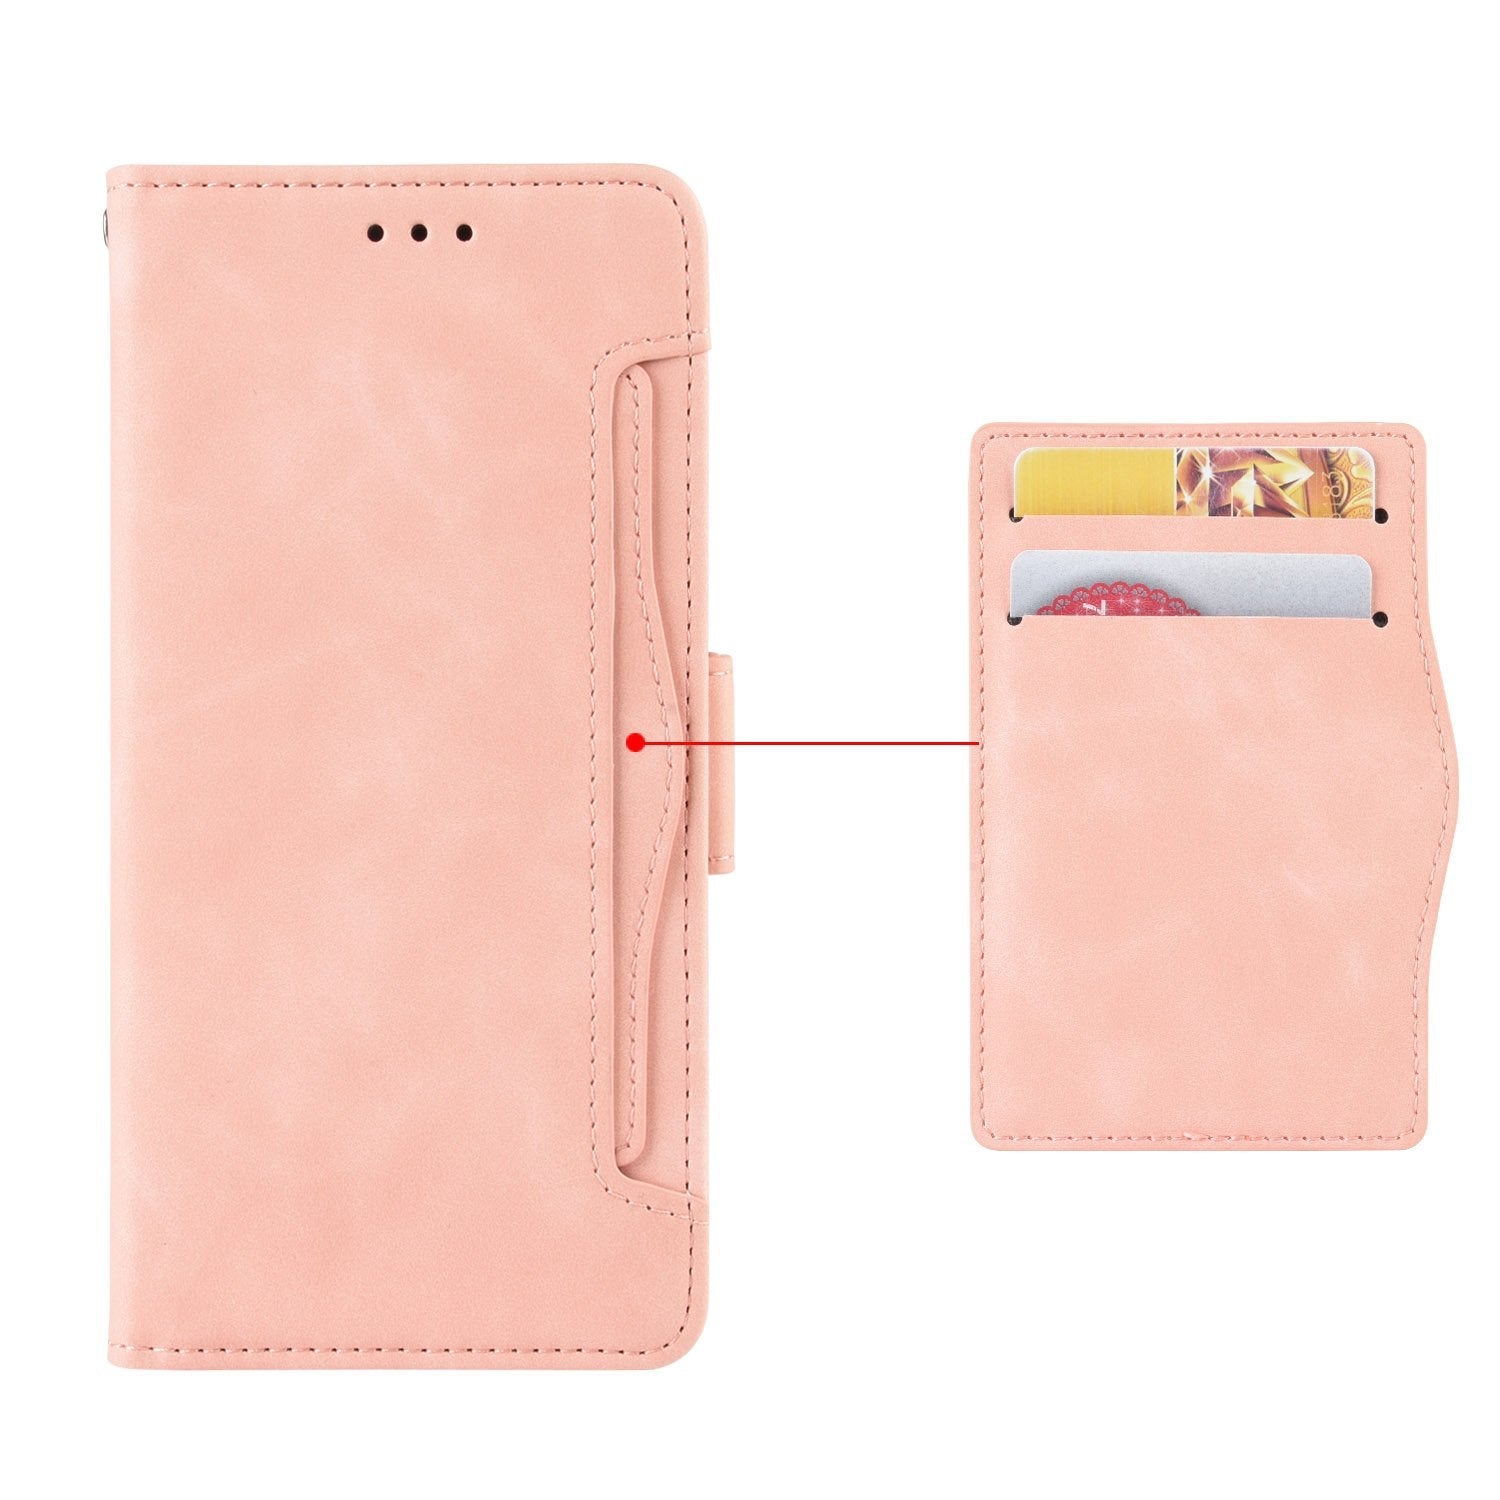 Luxury Multi-Card Slot Wallet Flip Cover for Galaxy S/Note Series